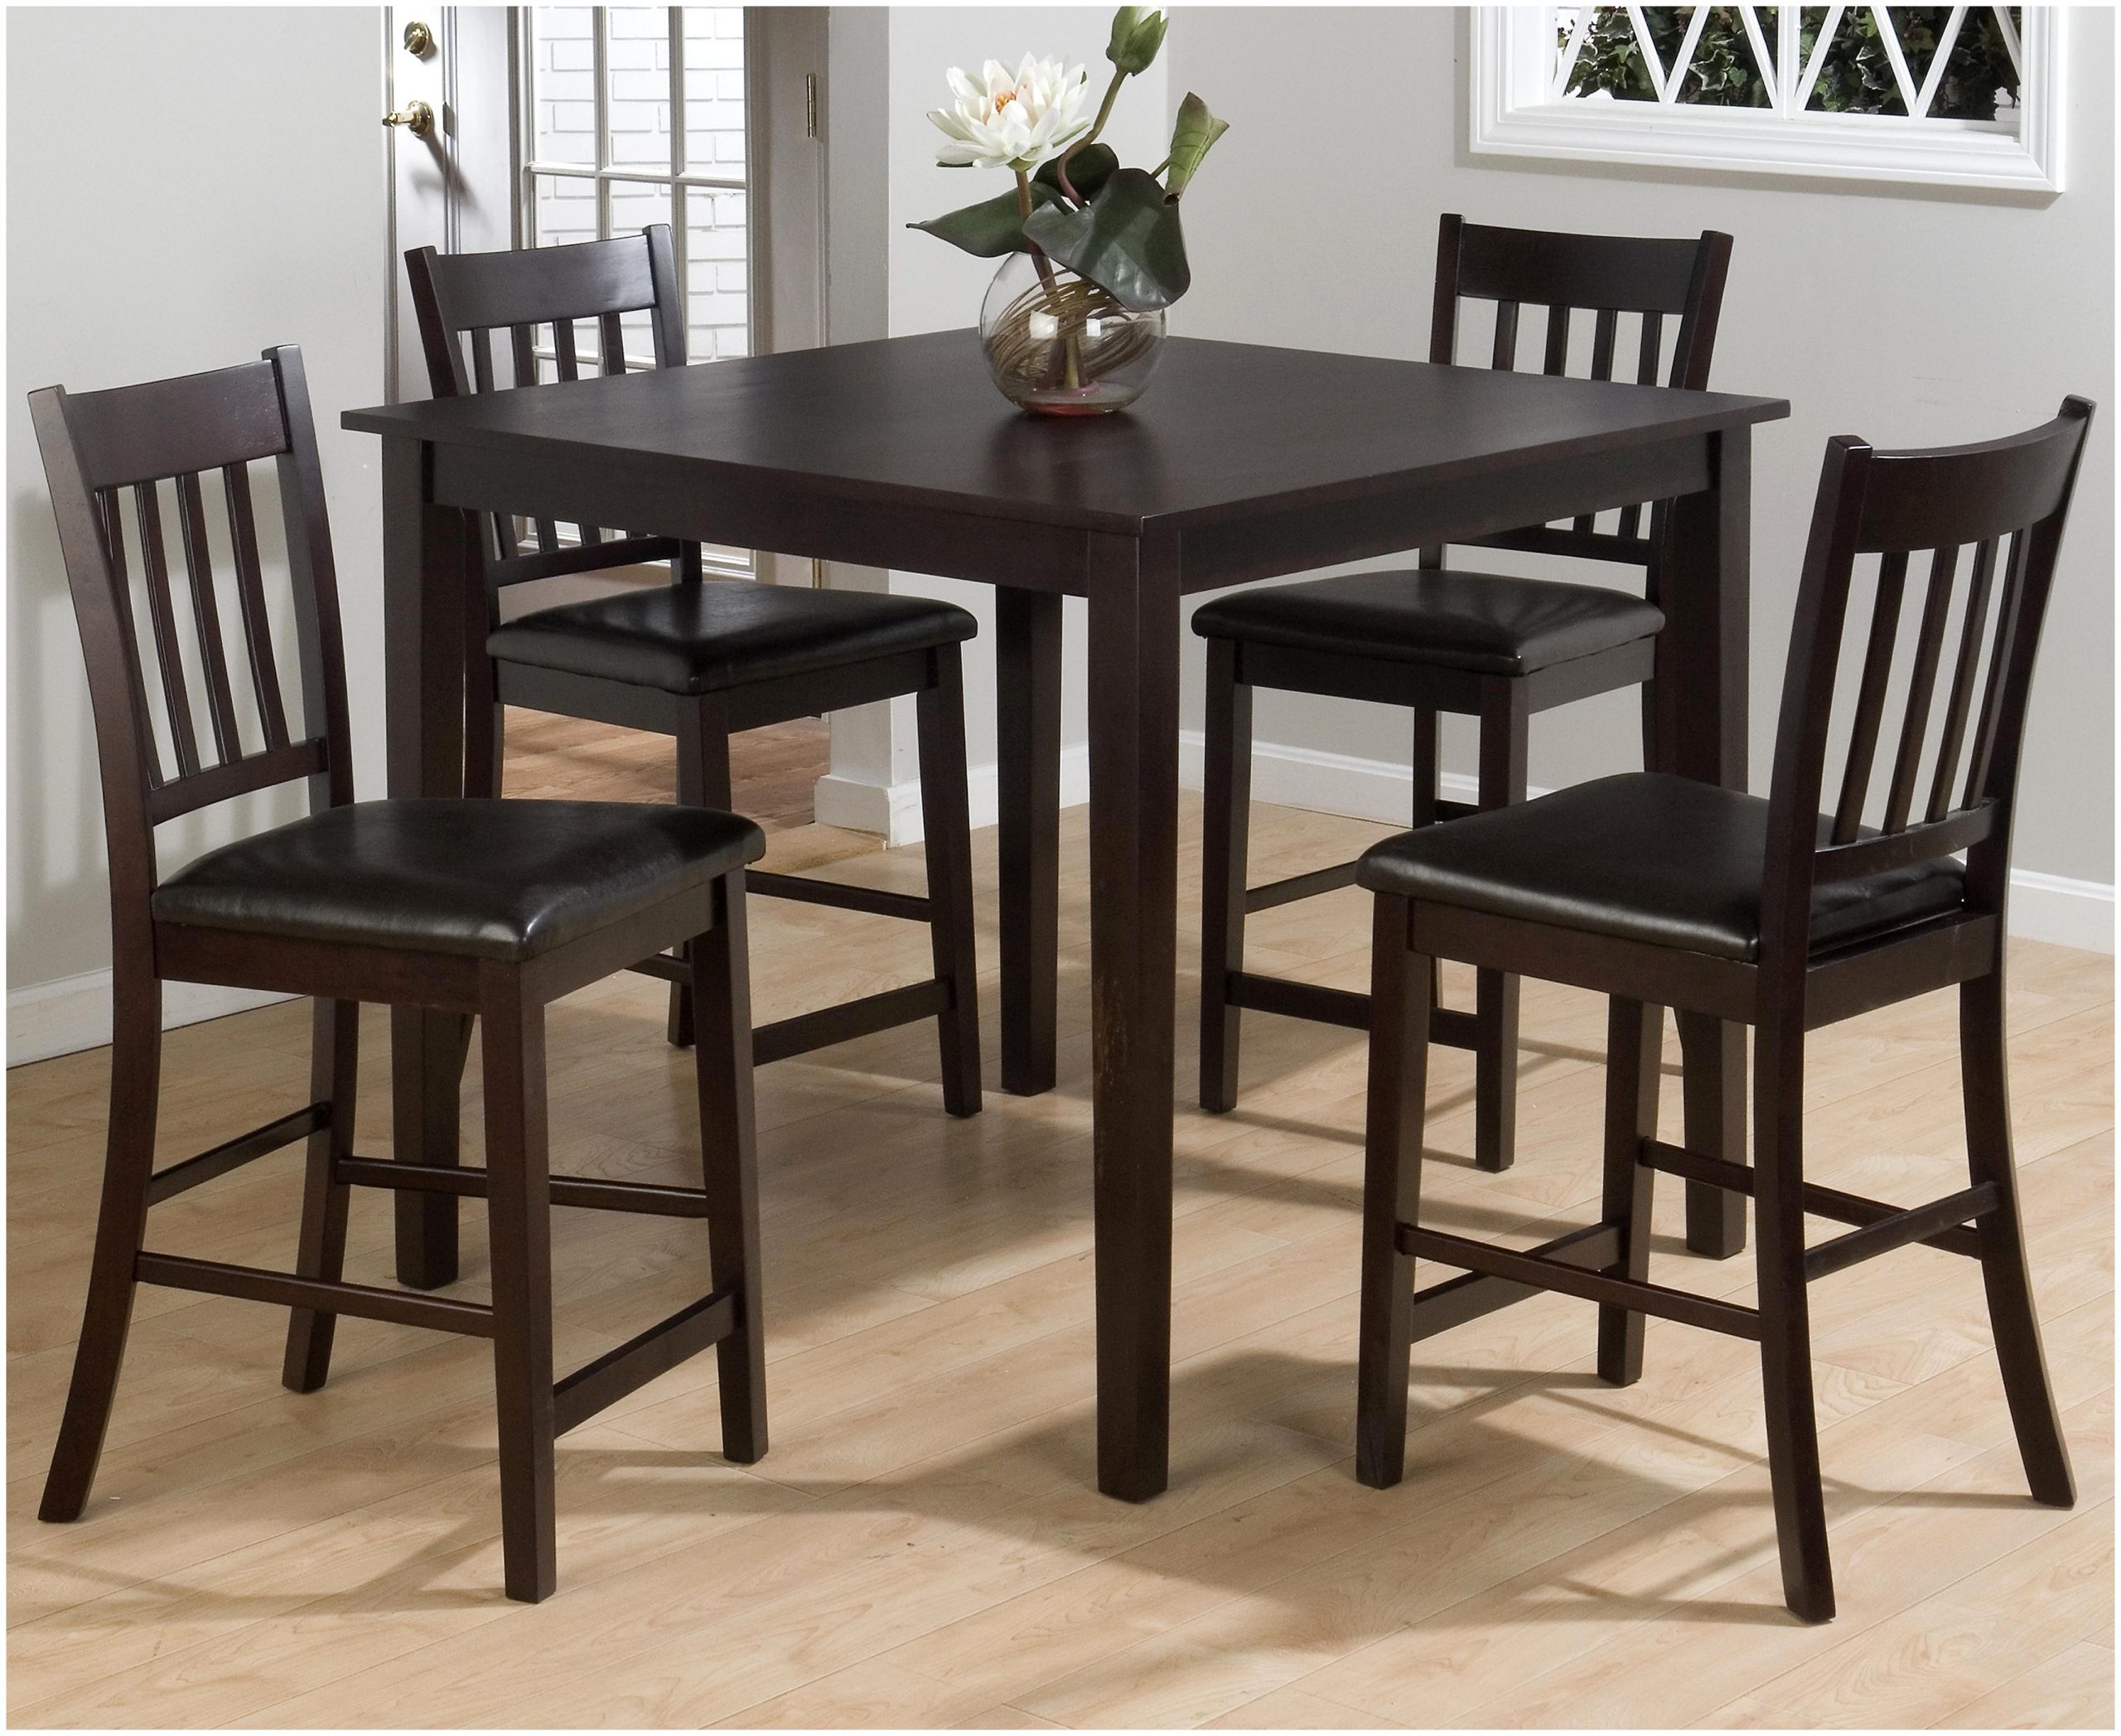 18 Elegant Image Of Big Lots Kitchen Tables 67376 Tables Ideas With Regard To Size 3428 X 2805 Scaled 